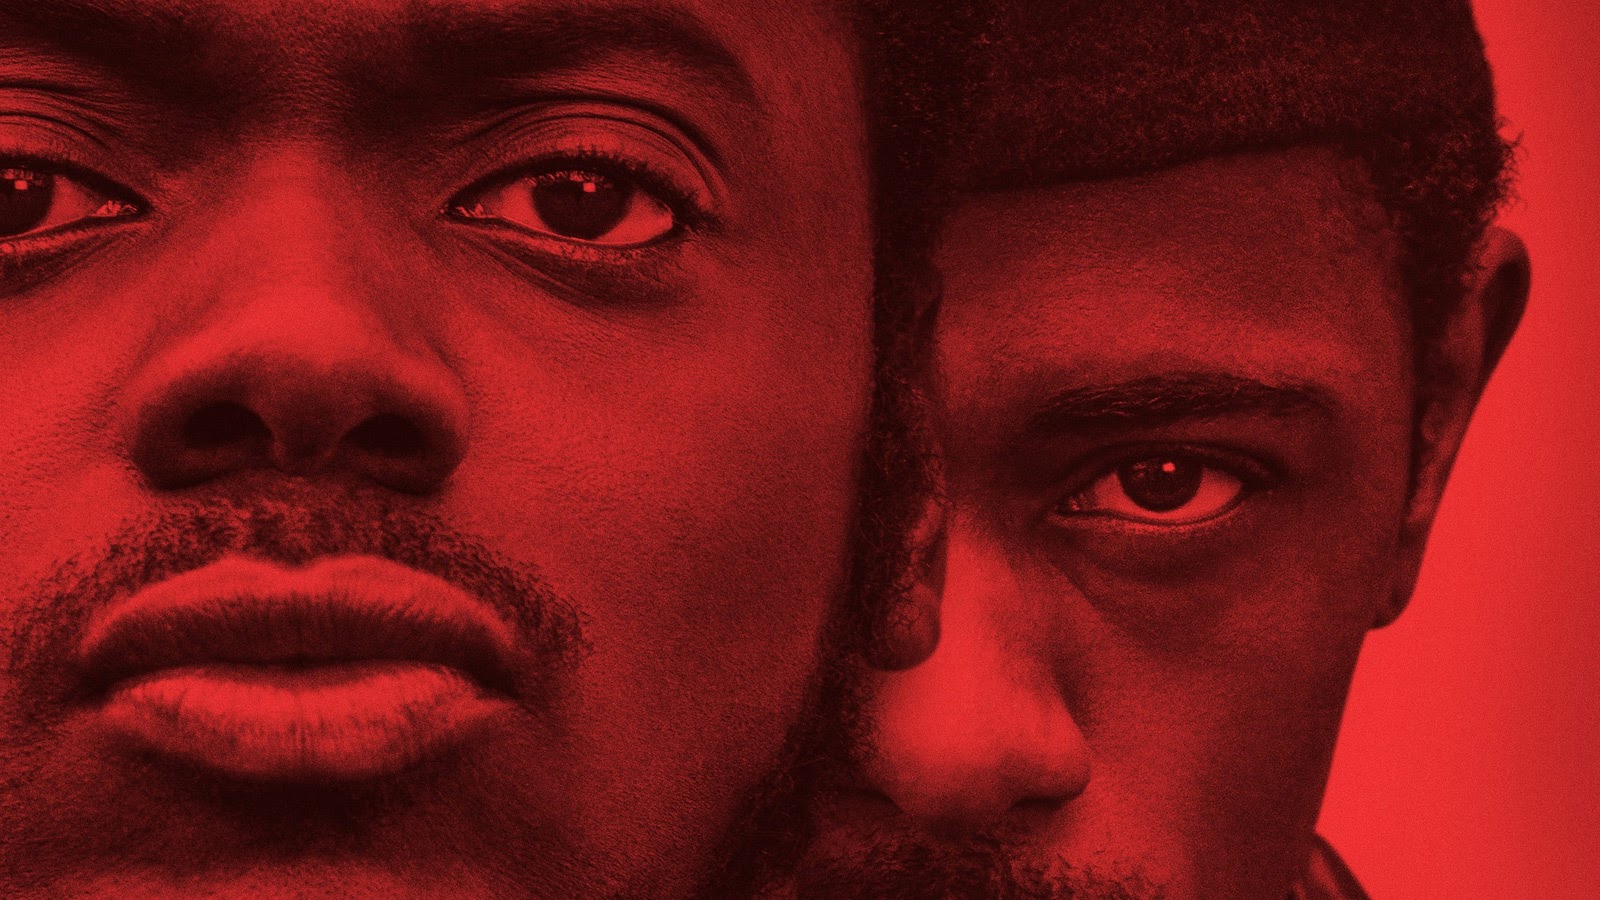 Poster detail from Judas and the Black Messiah